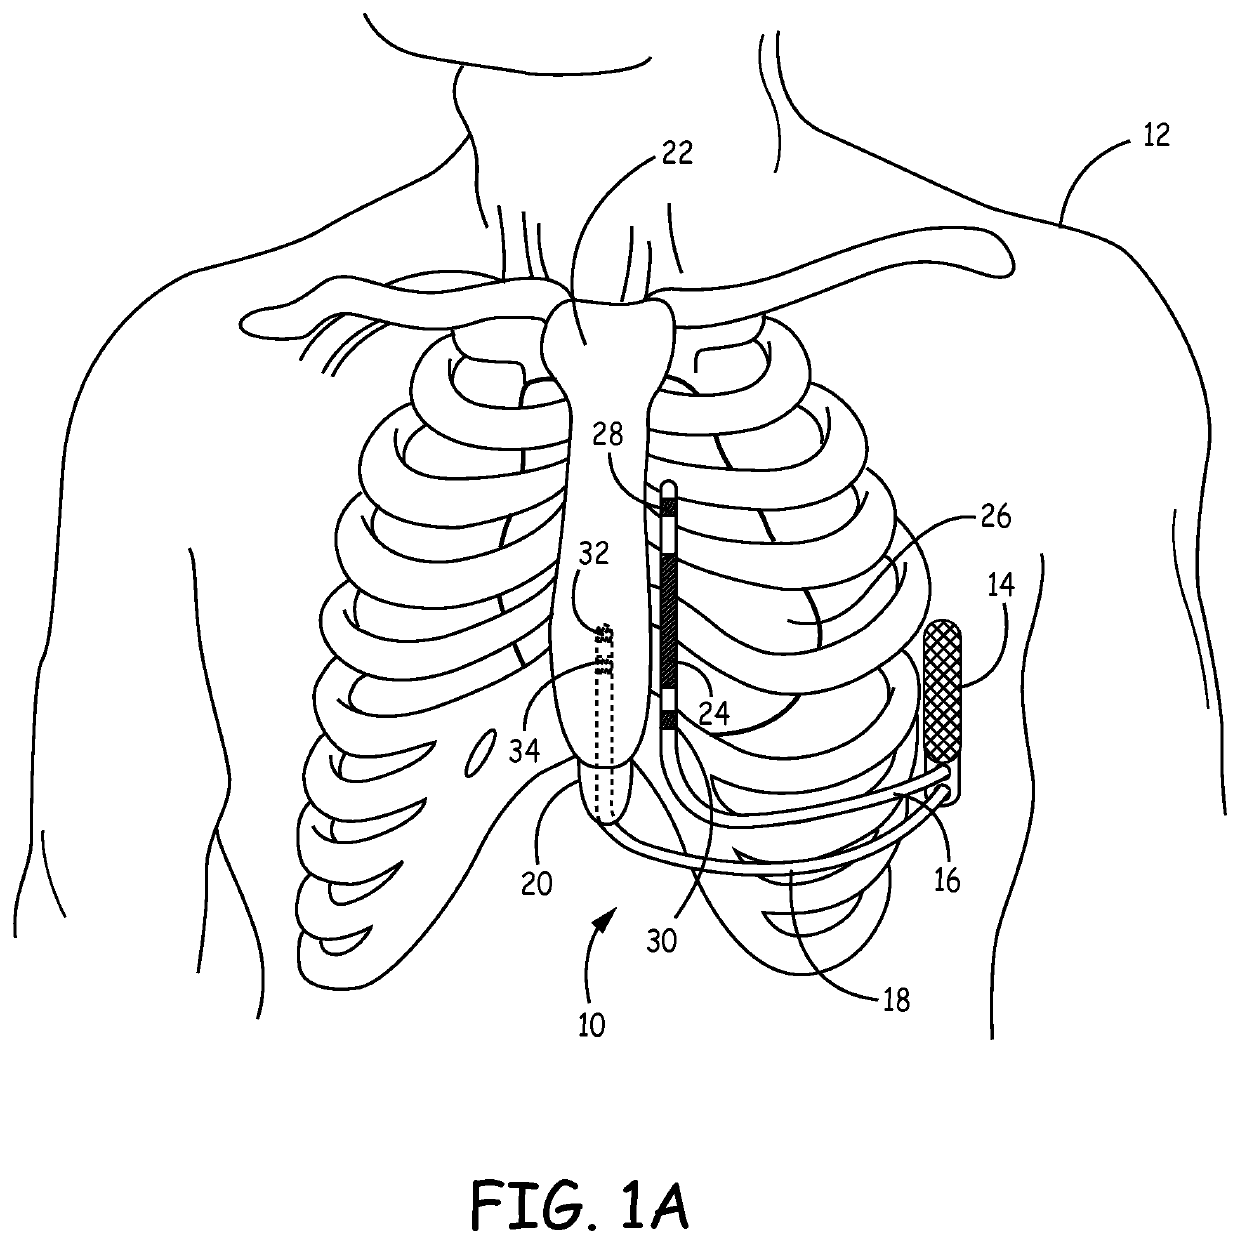 Implantable cardioverter-defibrillator (ICD) system including substernal pacing lead